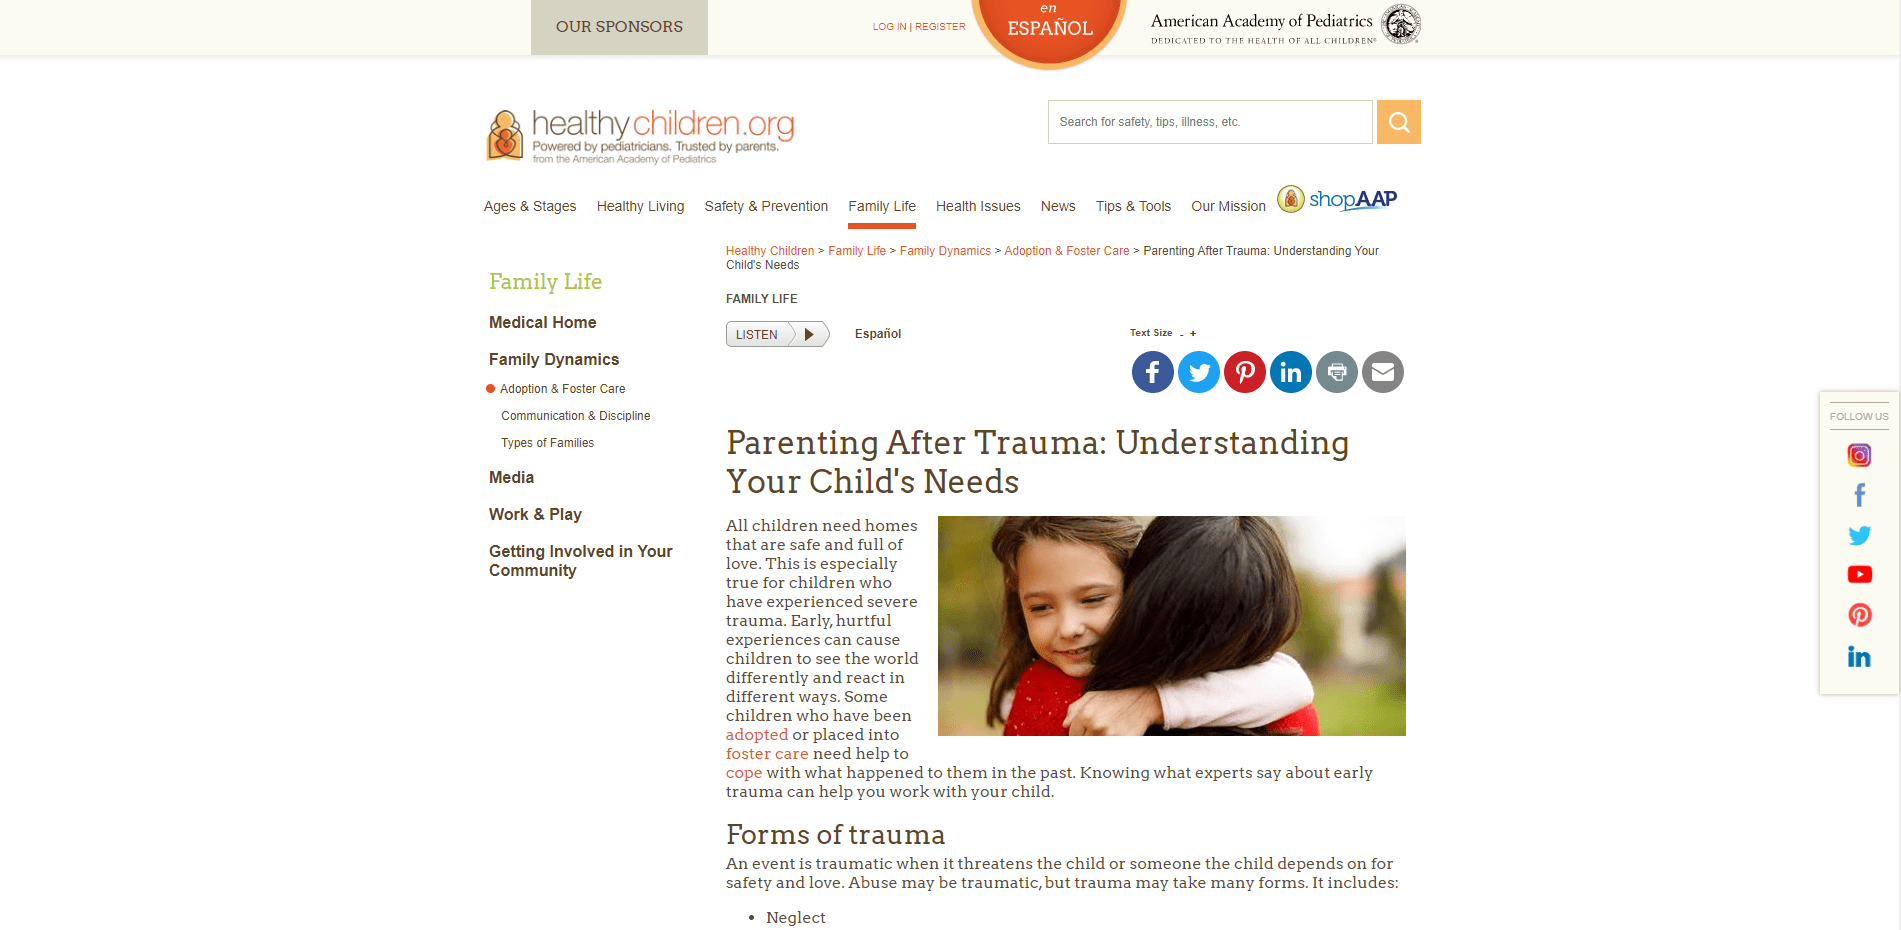 Parenting After Trauma: Understanding Your Child's Needs